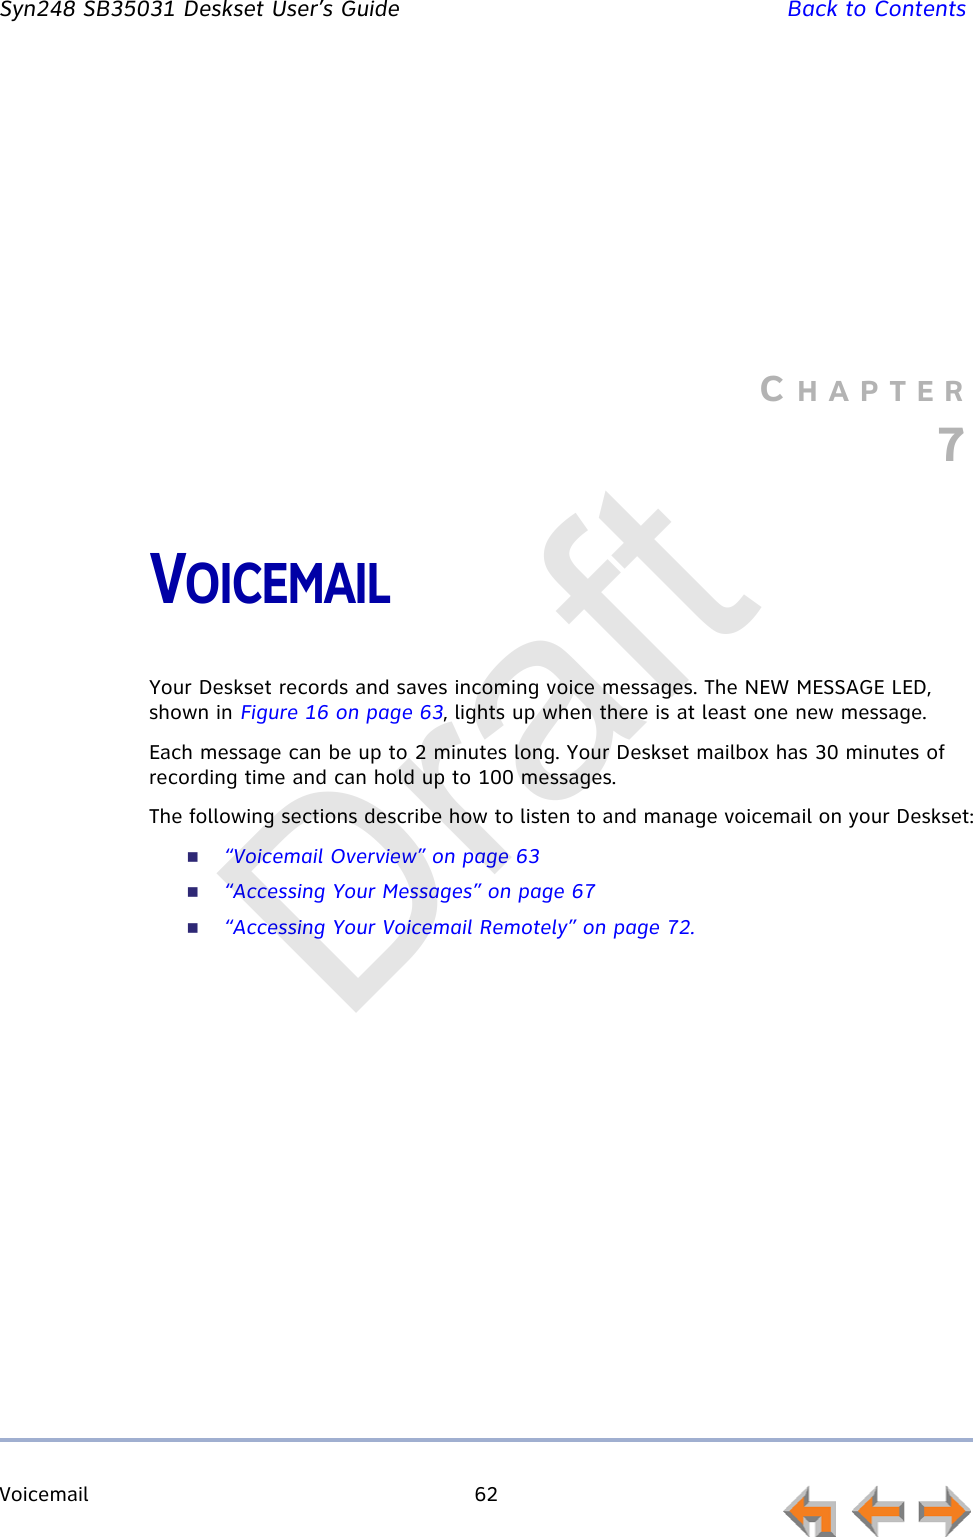 Voicemail 62         Syn248 SB35031 Deskset User’s Guide Back to ContentsCHAPTER7VOICEMAILYour Deskset records and saves incoming voice messages. The NEW MESSAGE LED, shown in Figure 16 on page 63, lights up when there is at least one new message. Each message can be up to 2 minutes long. Your Deskset mailbox has 30 minutes of recording time and can hold up to 100 messages.The following sections describe how to listen to and manage voicemail on your Deskset:“Voicemail Overview” on page 63“Accessing Your Messages” on page 67“Accessing Your Voicemail Remotely” on page 72.Draft